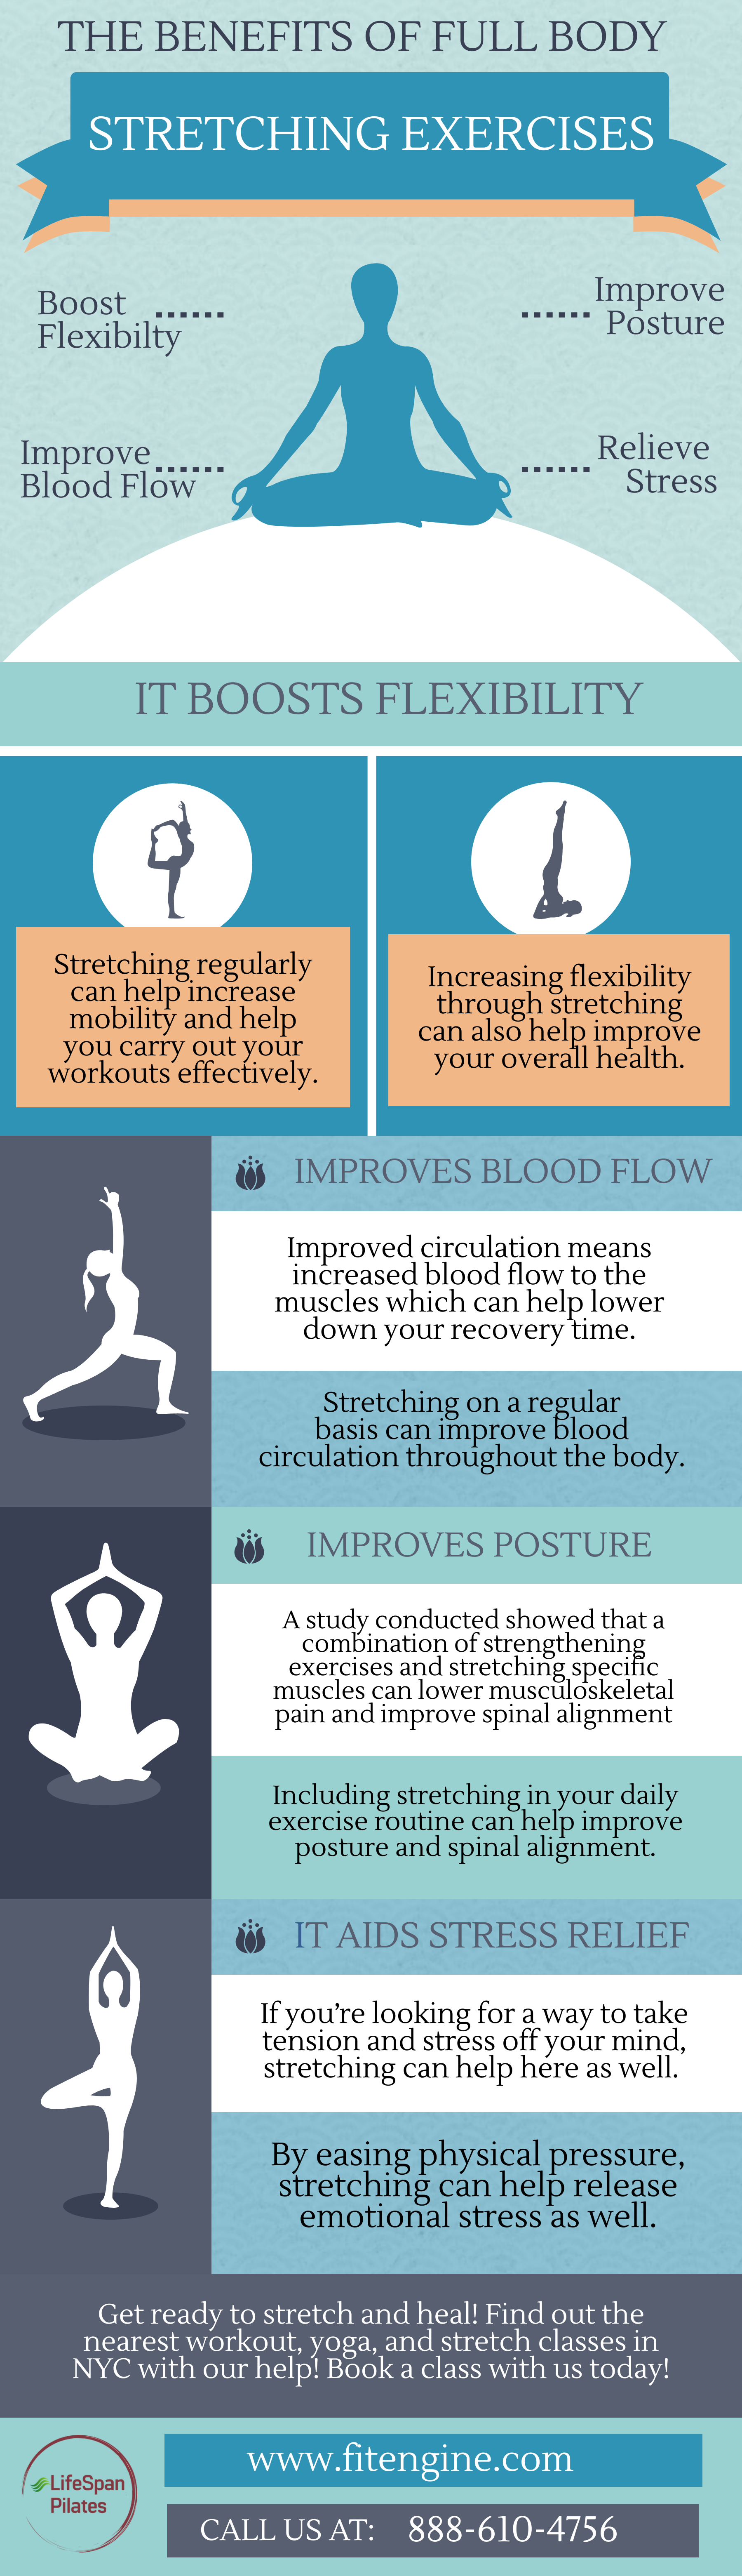 Mental and Physical Benefits of Stretching Exercises